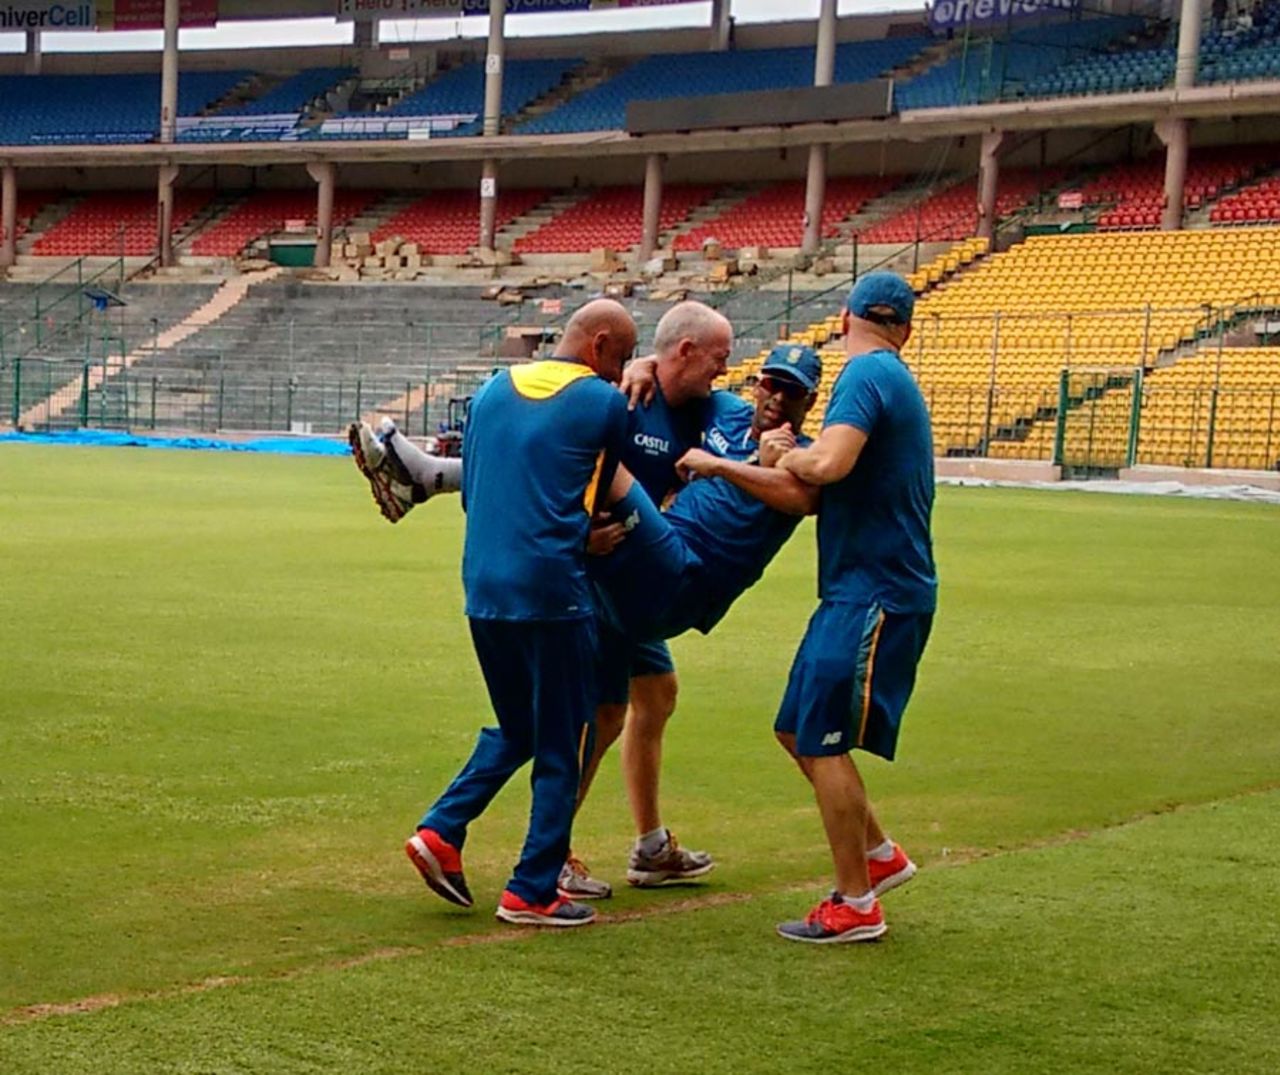 Vernon Philander had to be helped off the field after he injures himself during a training session, Bangalore, Novmeber 12, 2015